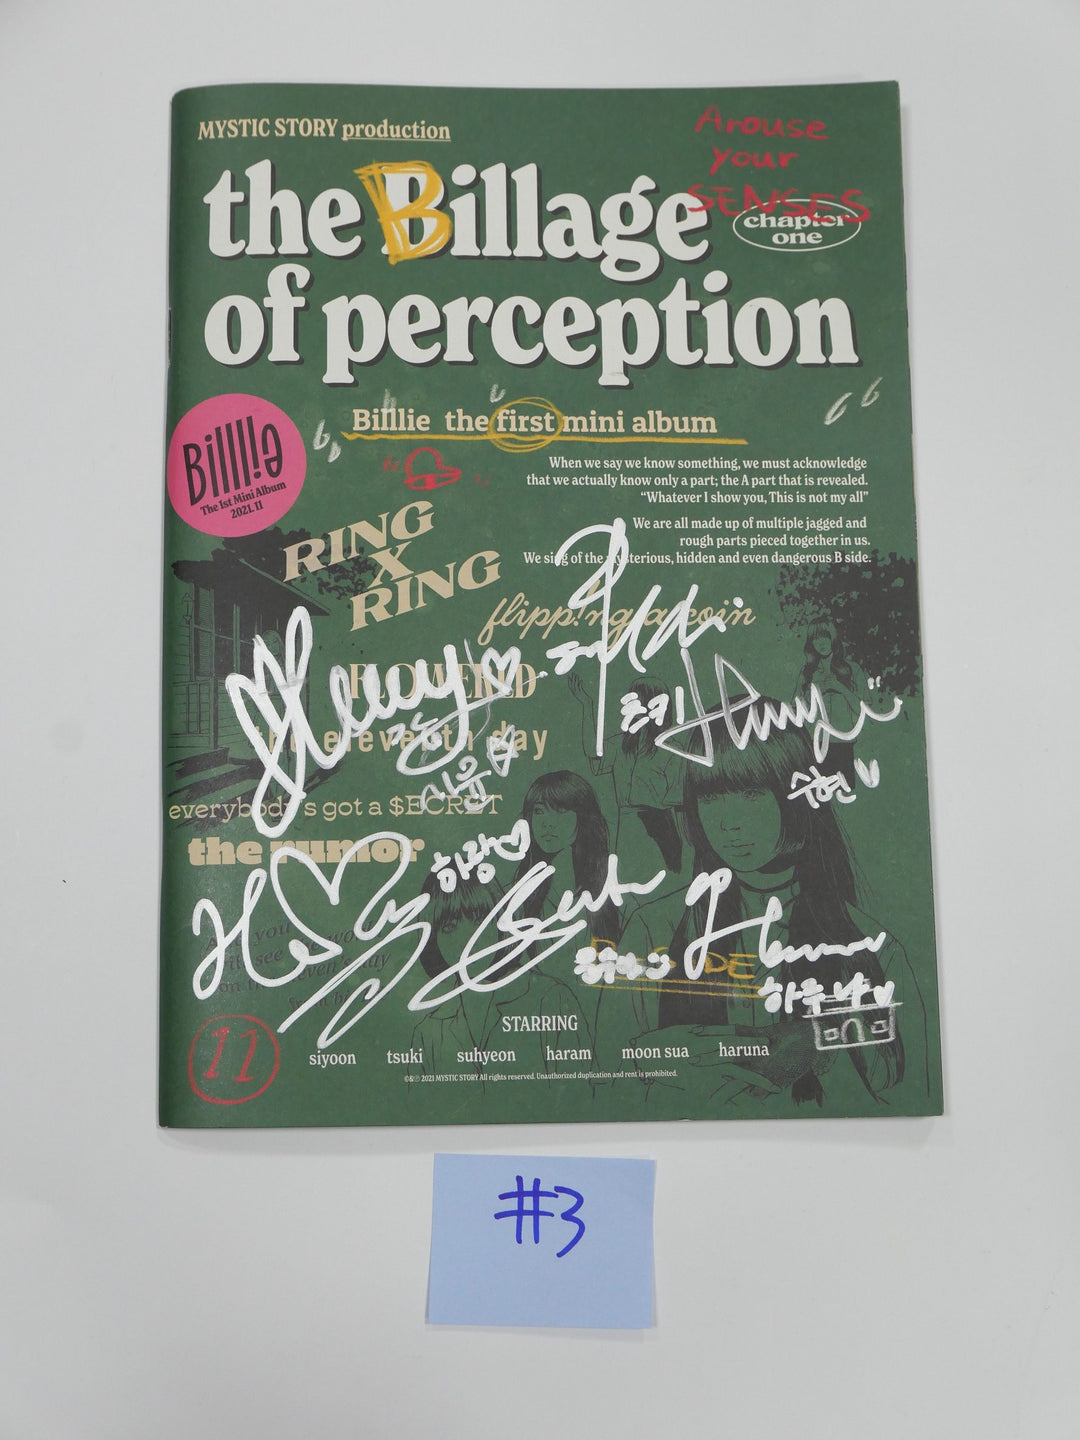 Billlie 'the Billage of perception : chapter one' - Hand Autographed(Signed) Promo Album